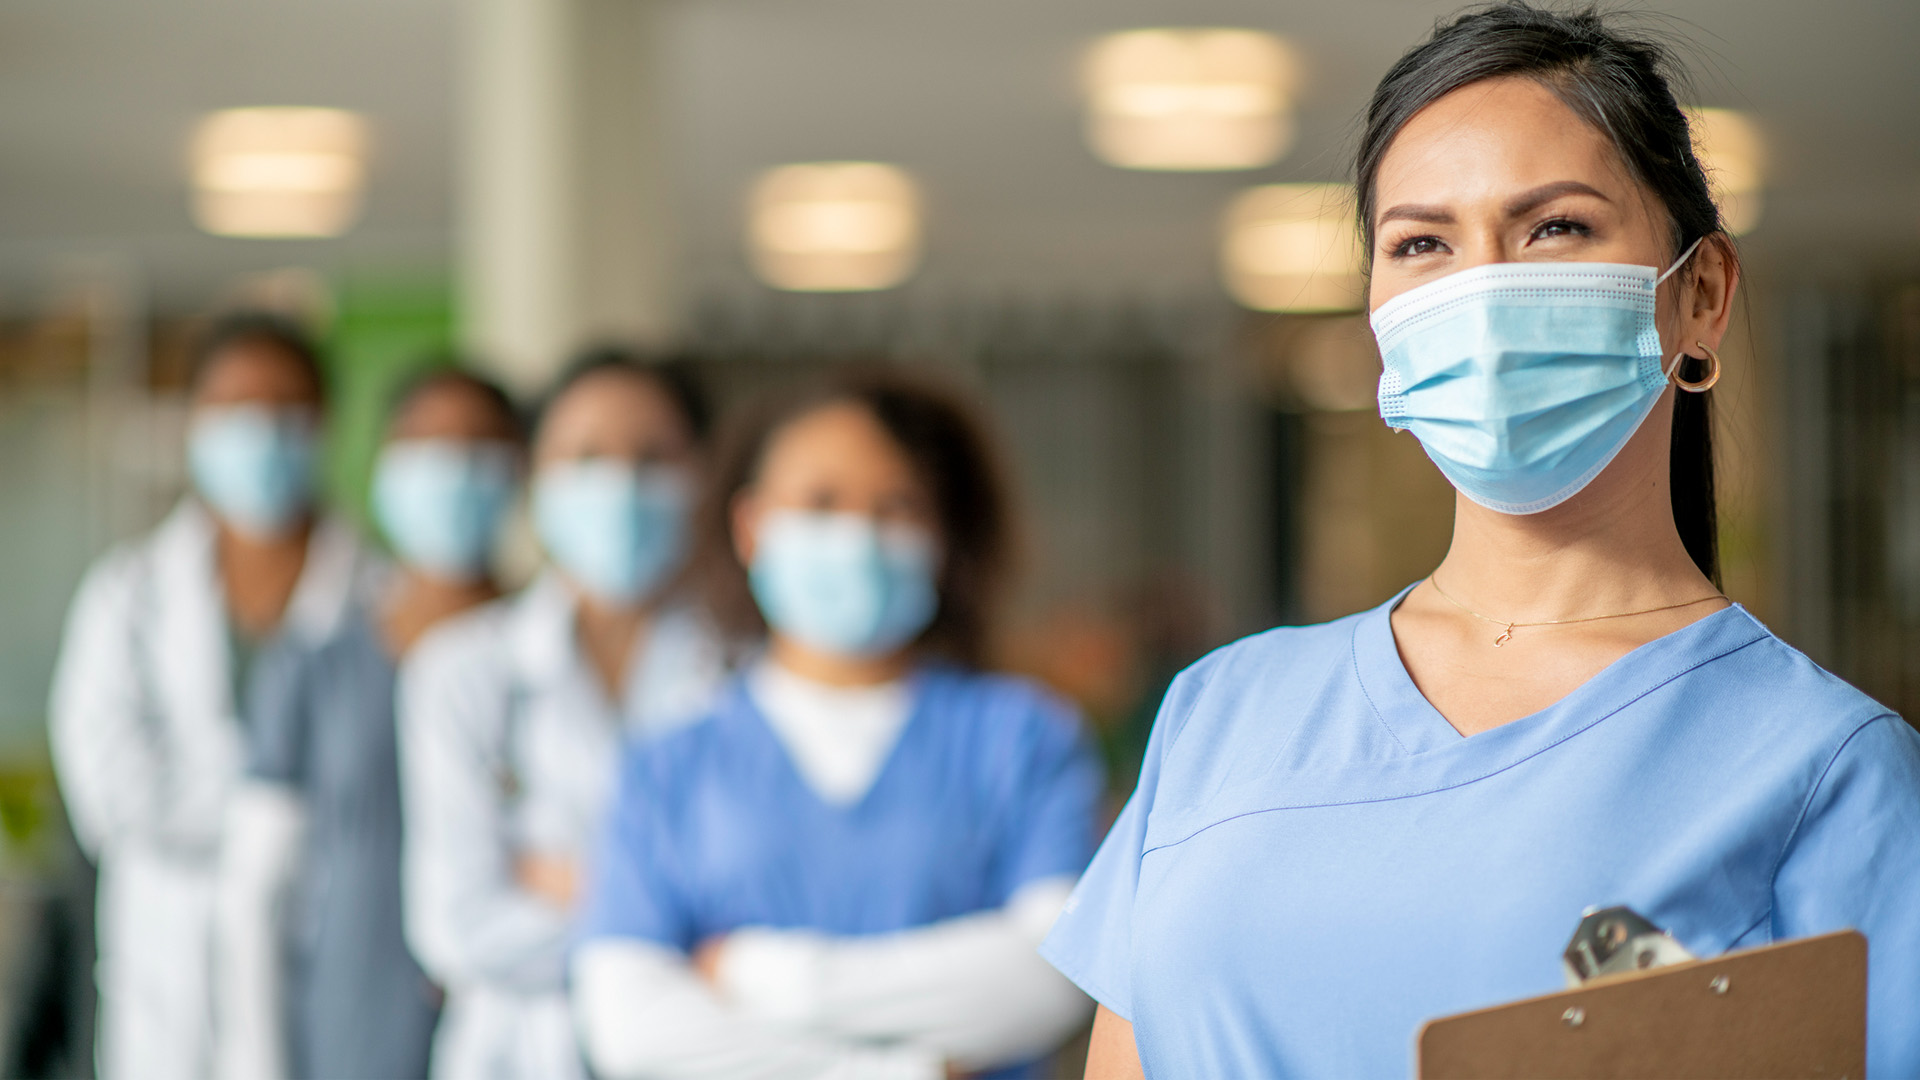 nurses standing in a line wearing masks and scrubs